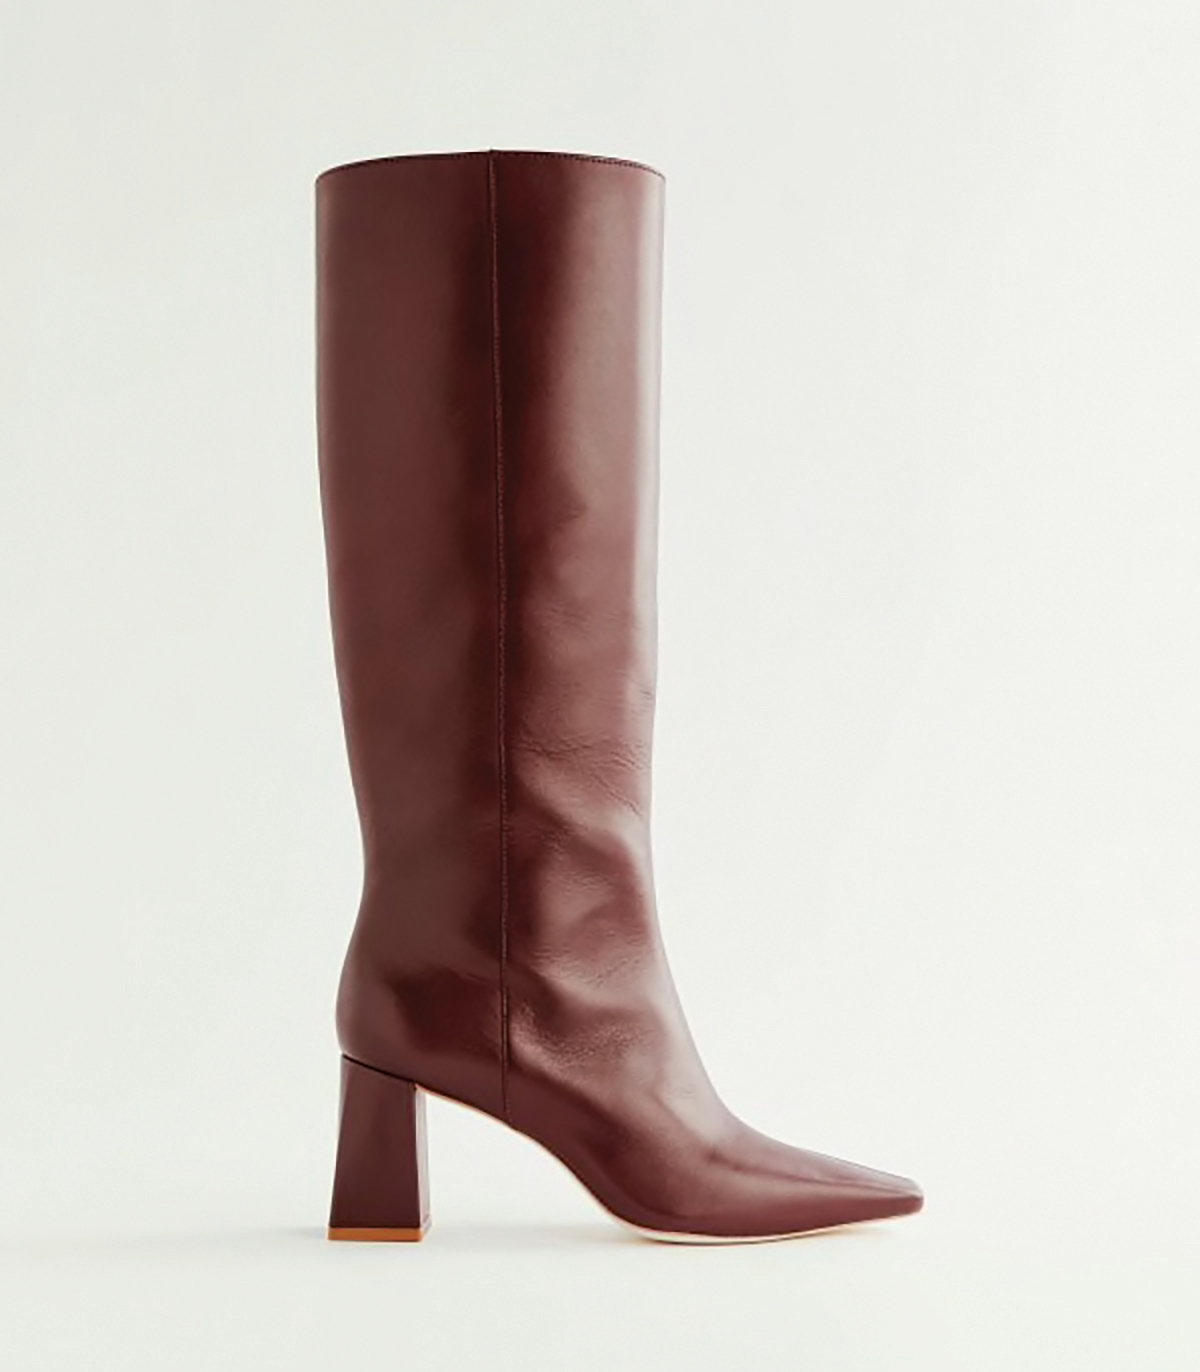 Reformation River Knee Boot